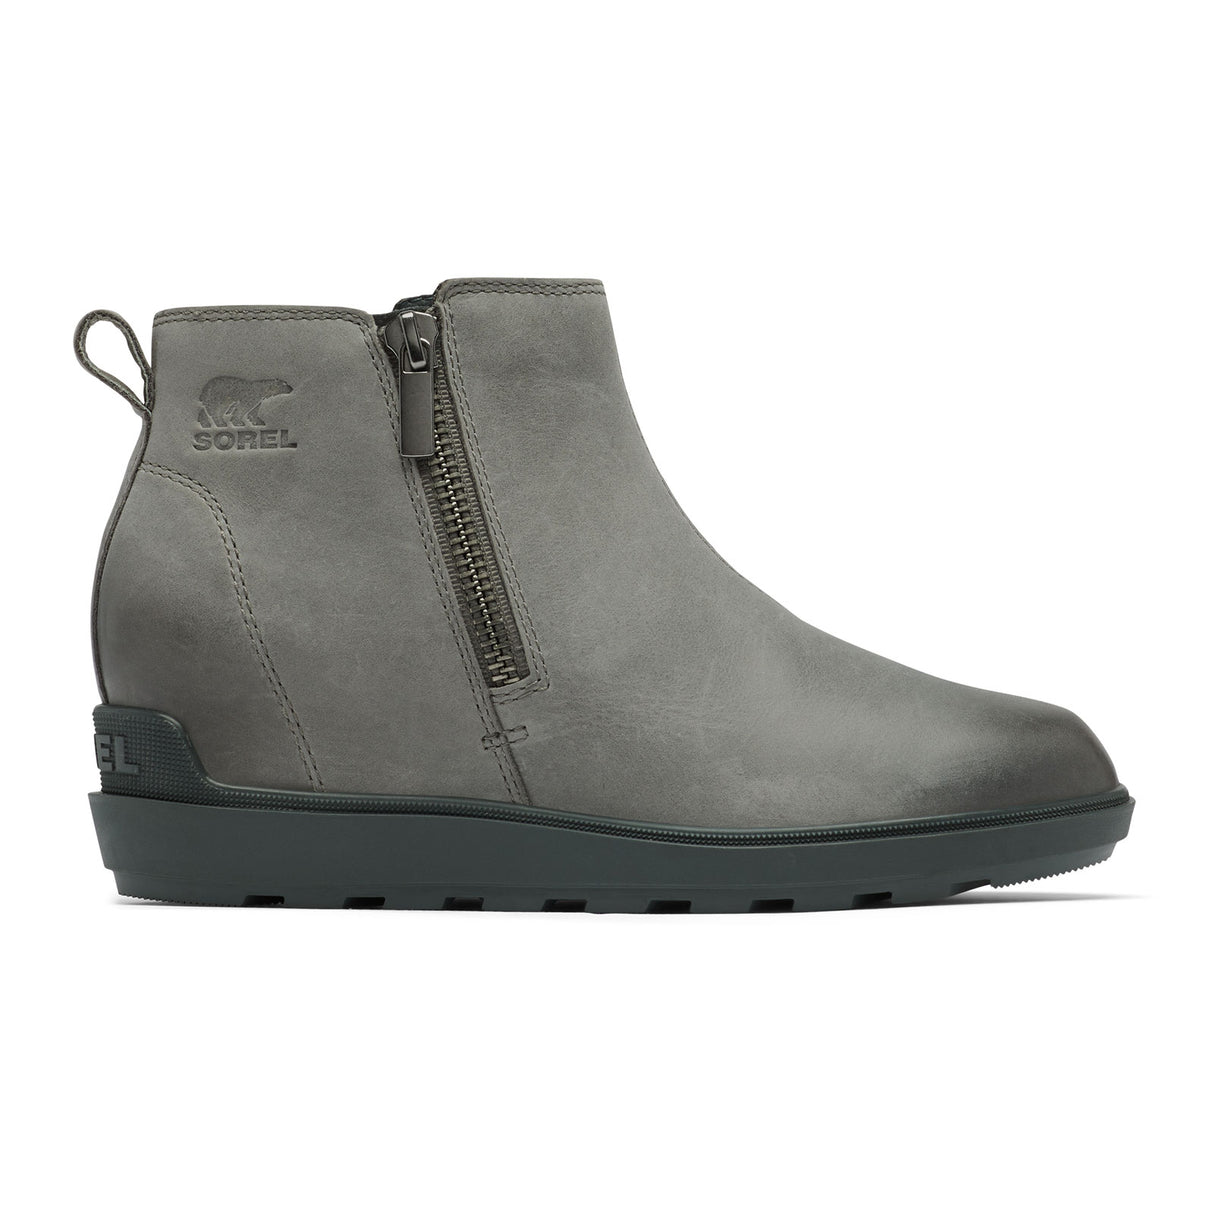 Sorel Evie II Zip Wedge Ankle Boot (Women) - Quarry/Grill Boots - Fashion - Wedge - The Heel Shoe Fitters